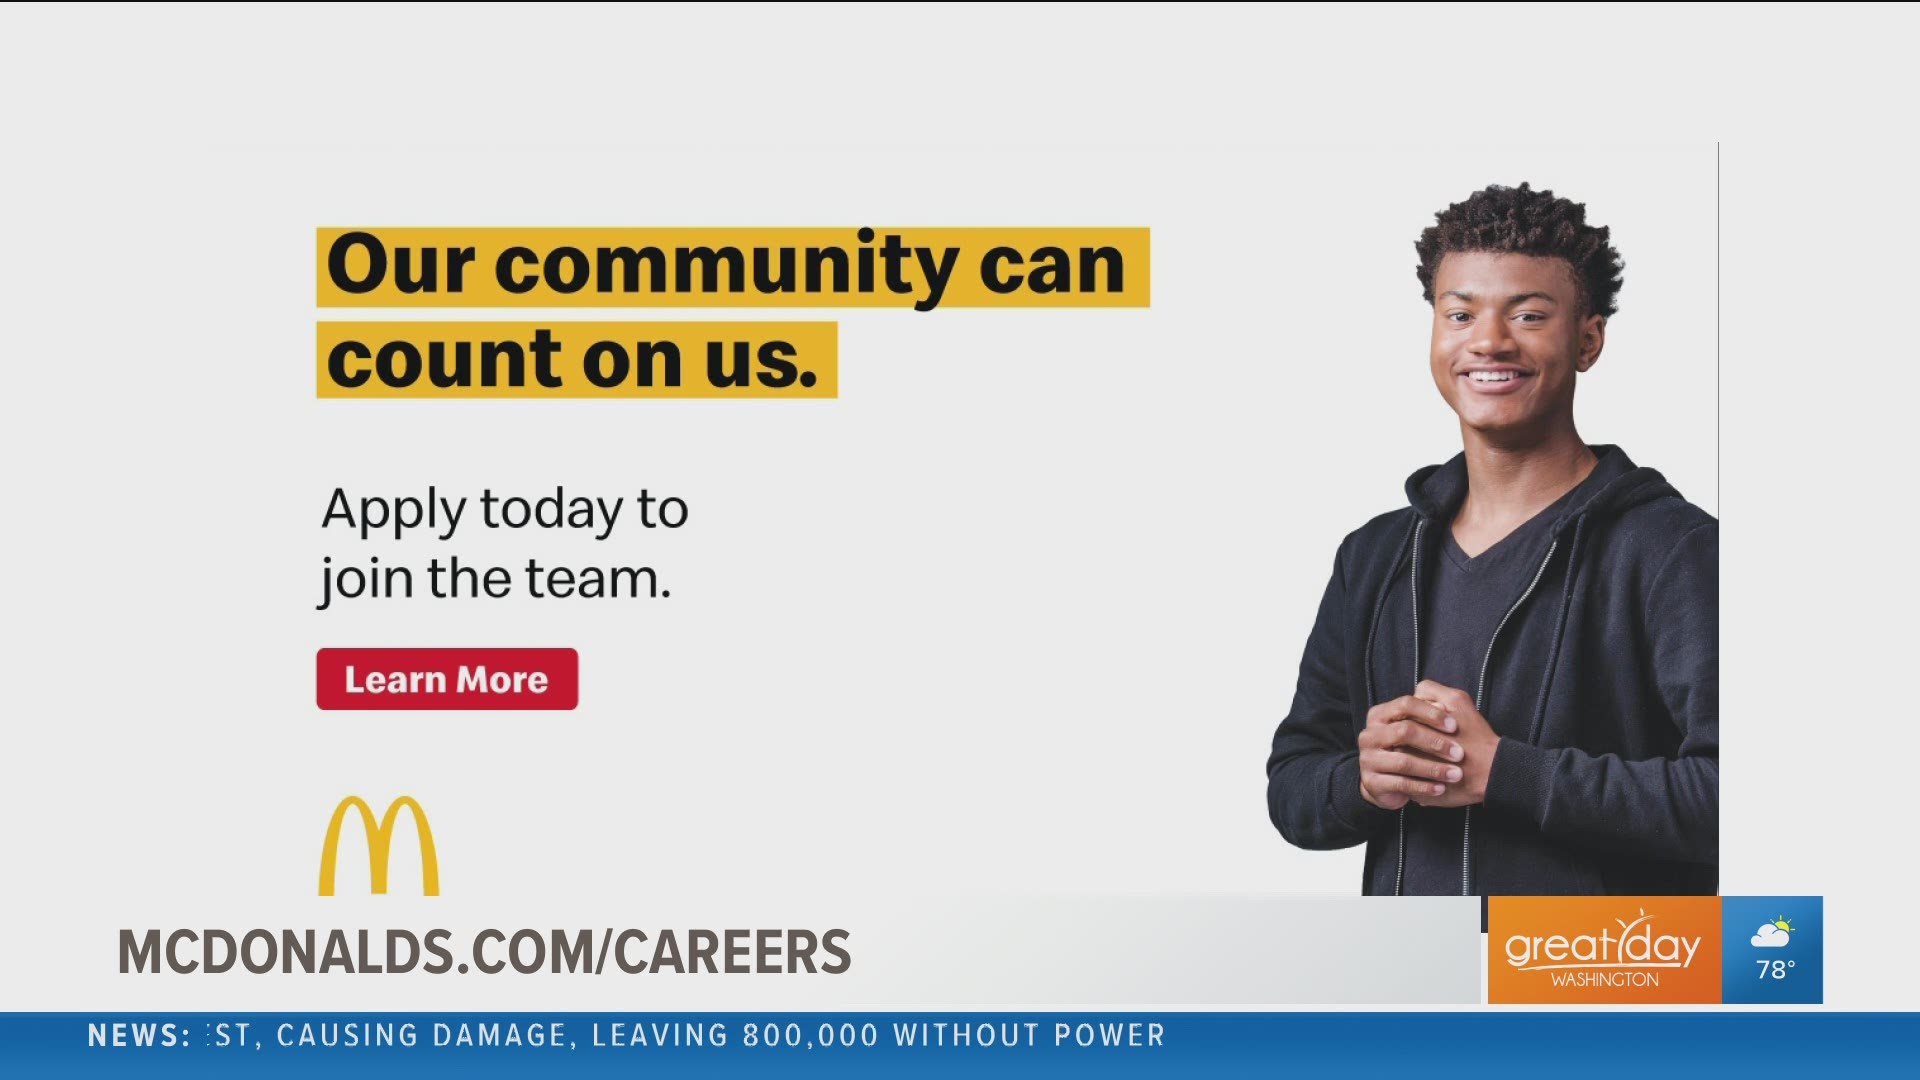 Sponsored by McDonald's. To apply visit www.mcdonalds.com/careers.